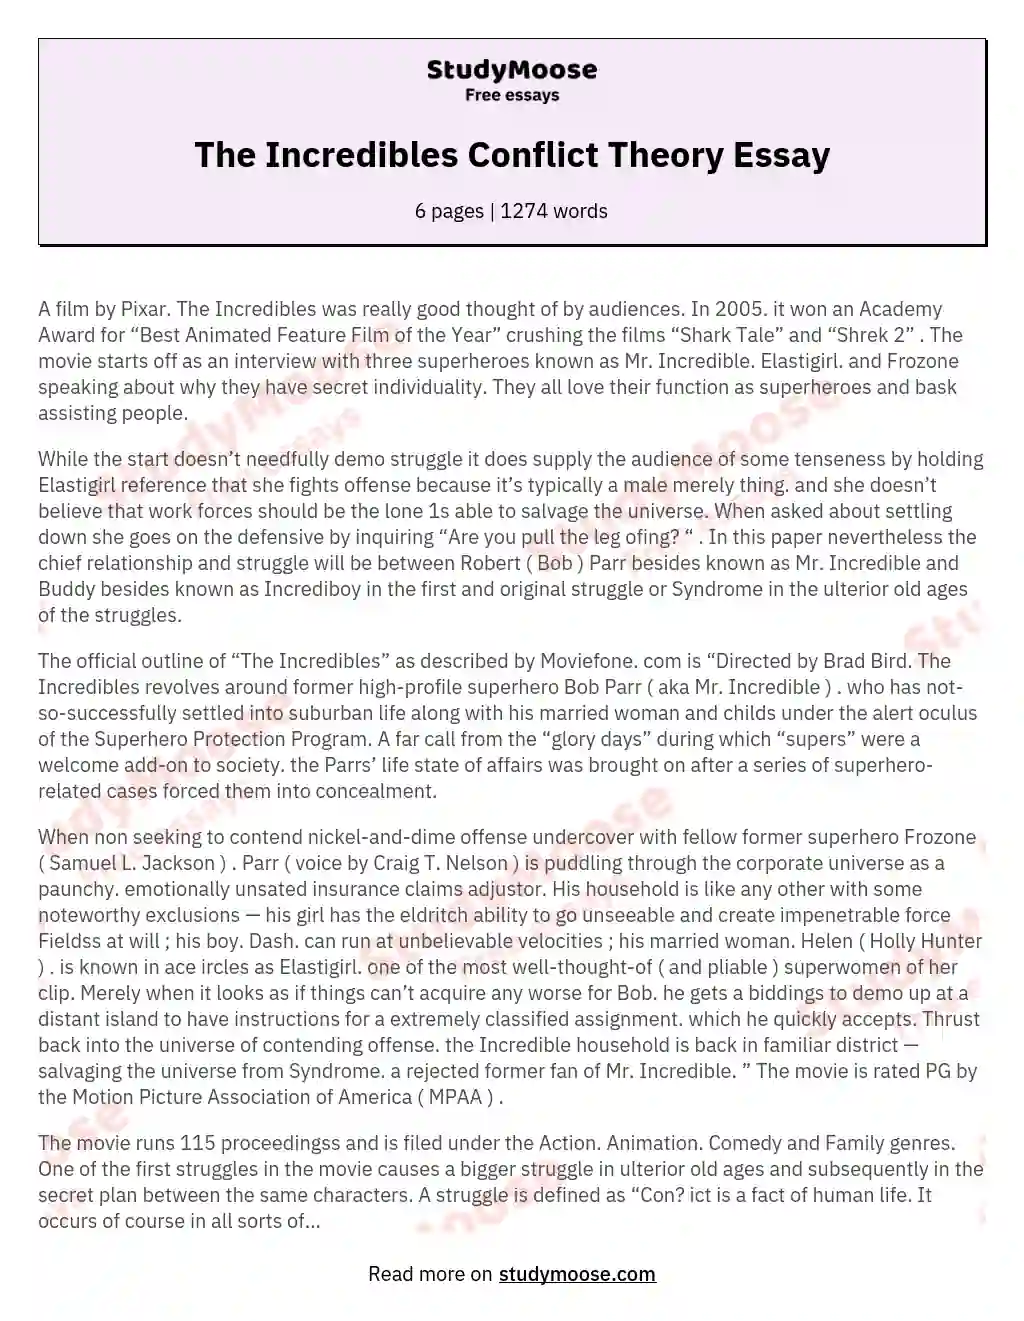 The Incredibles Conflict Theory Essay essay